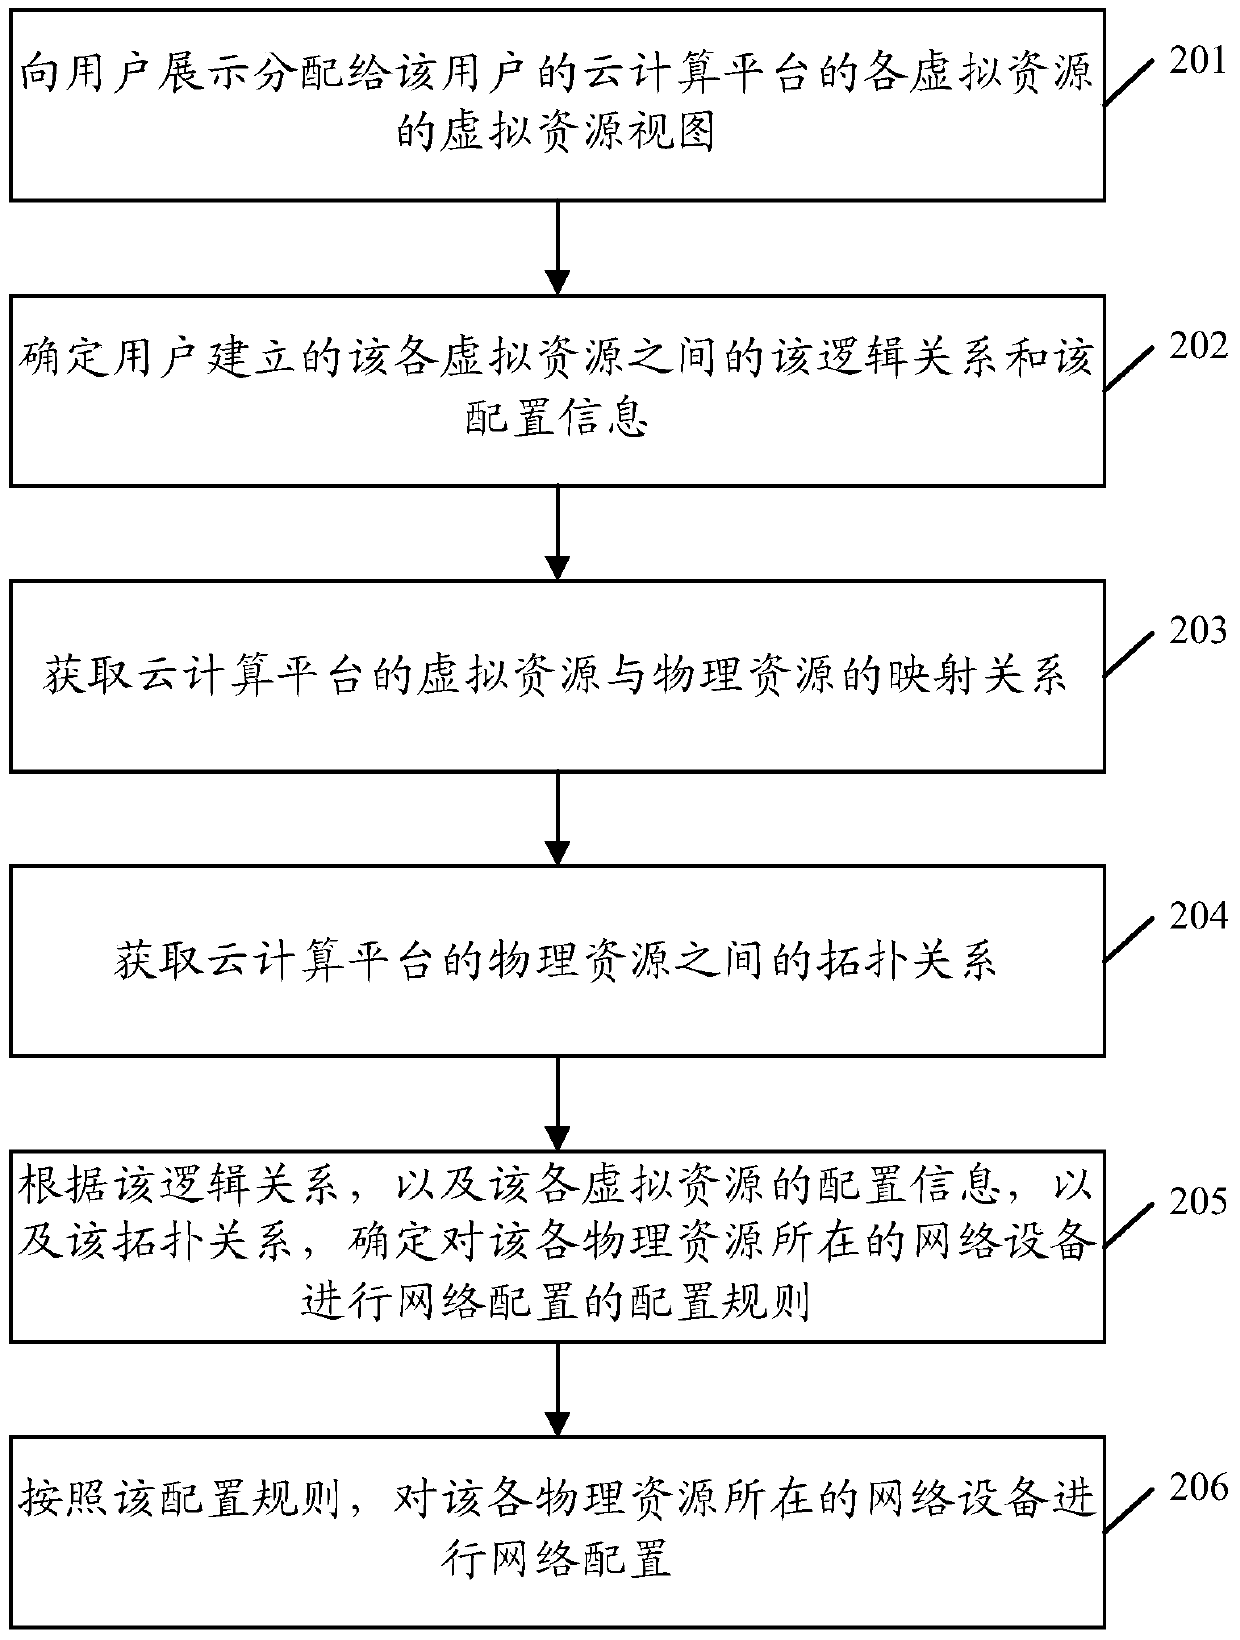 A network resource control method, device and system for a cloud computing platform